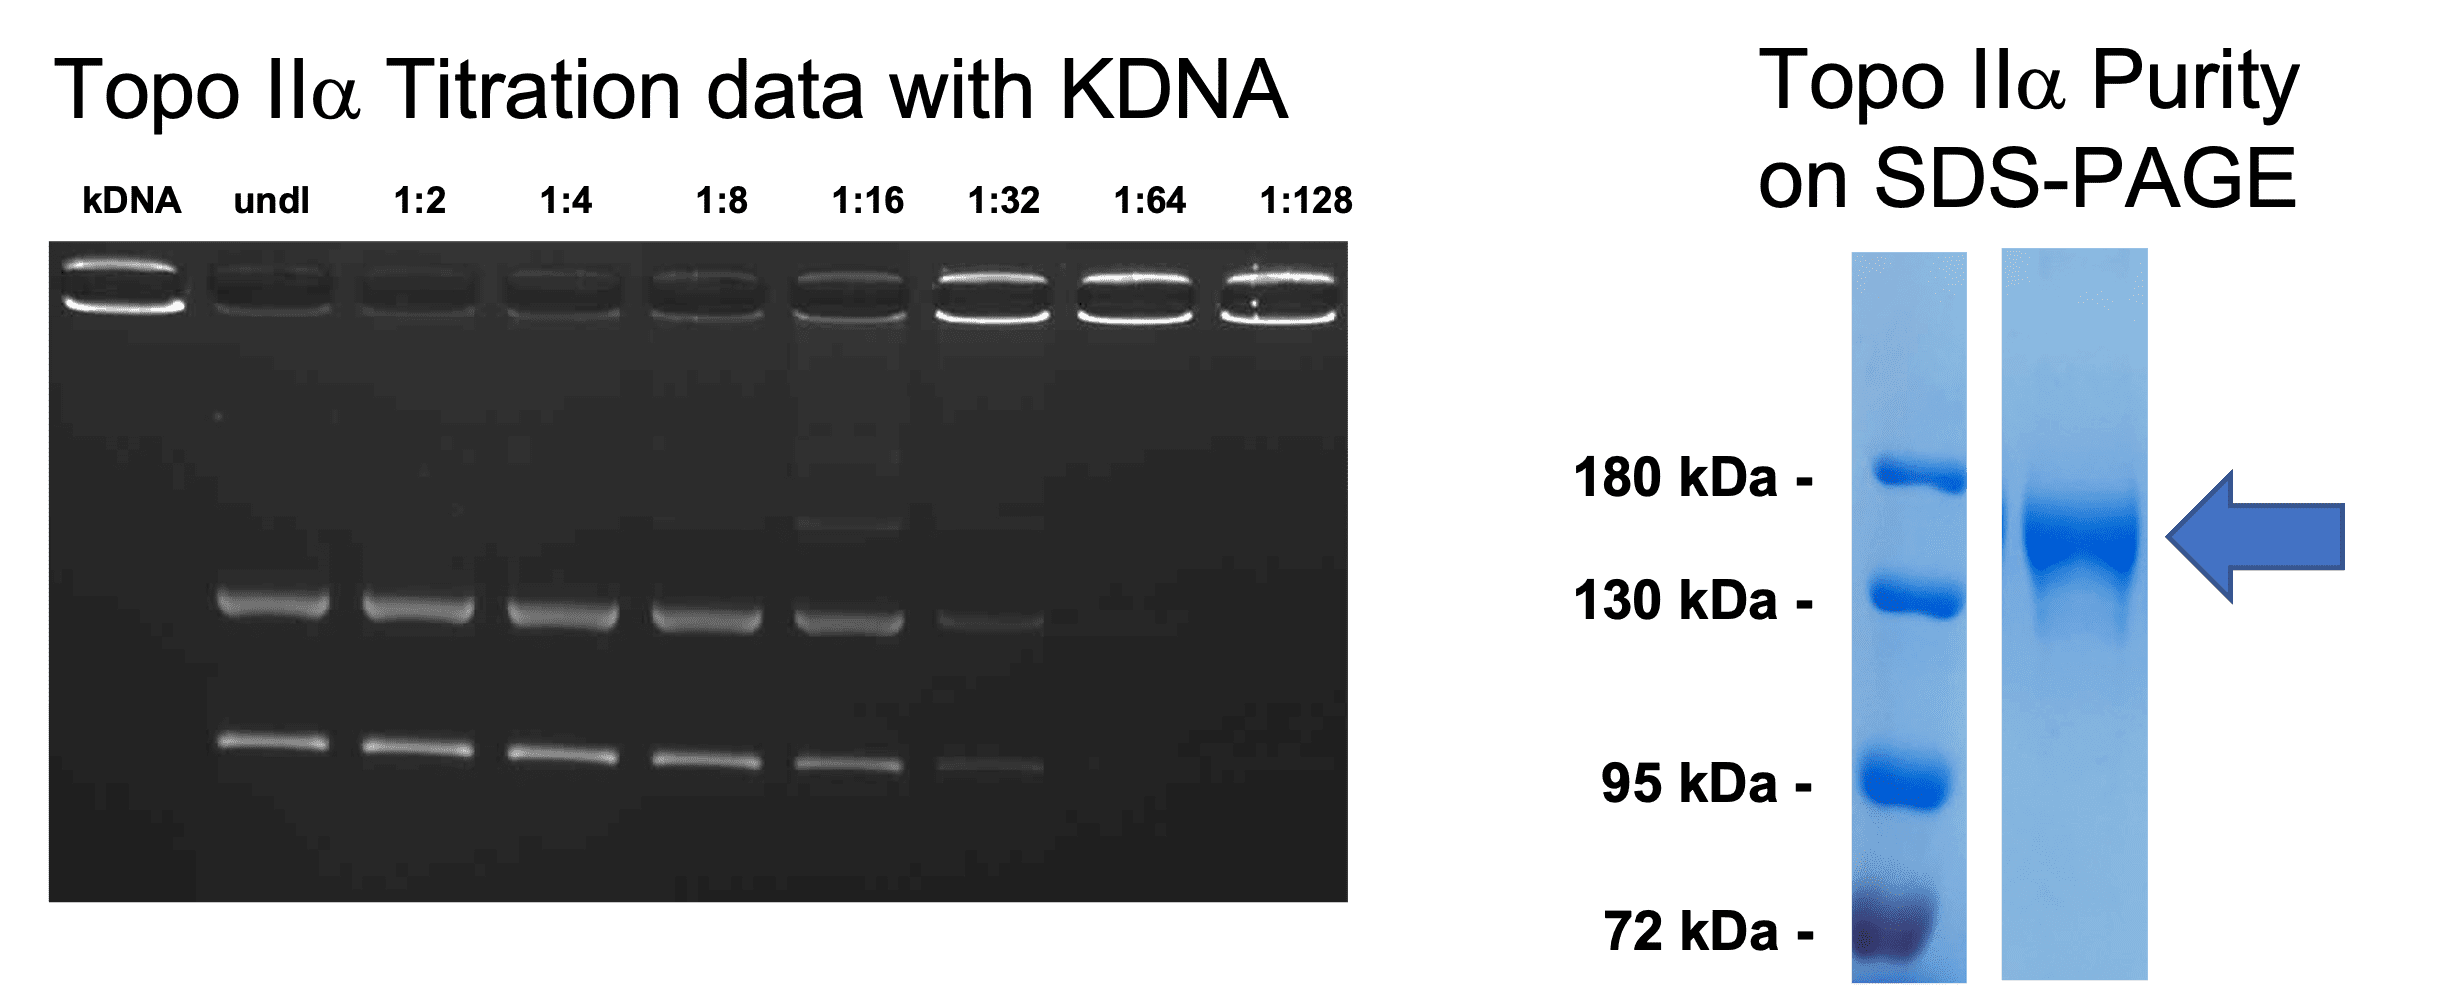 Human Topoisomerase II Alpha Titration Data with kDNA and Top2a Purity on SDS-PAGE